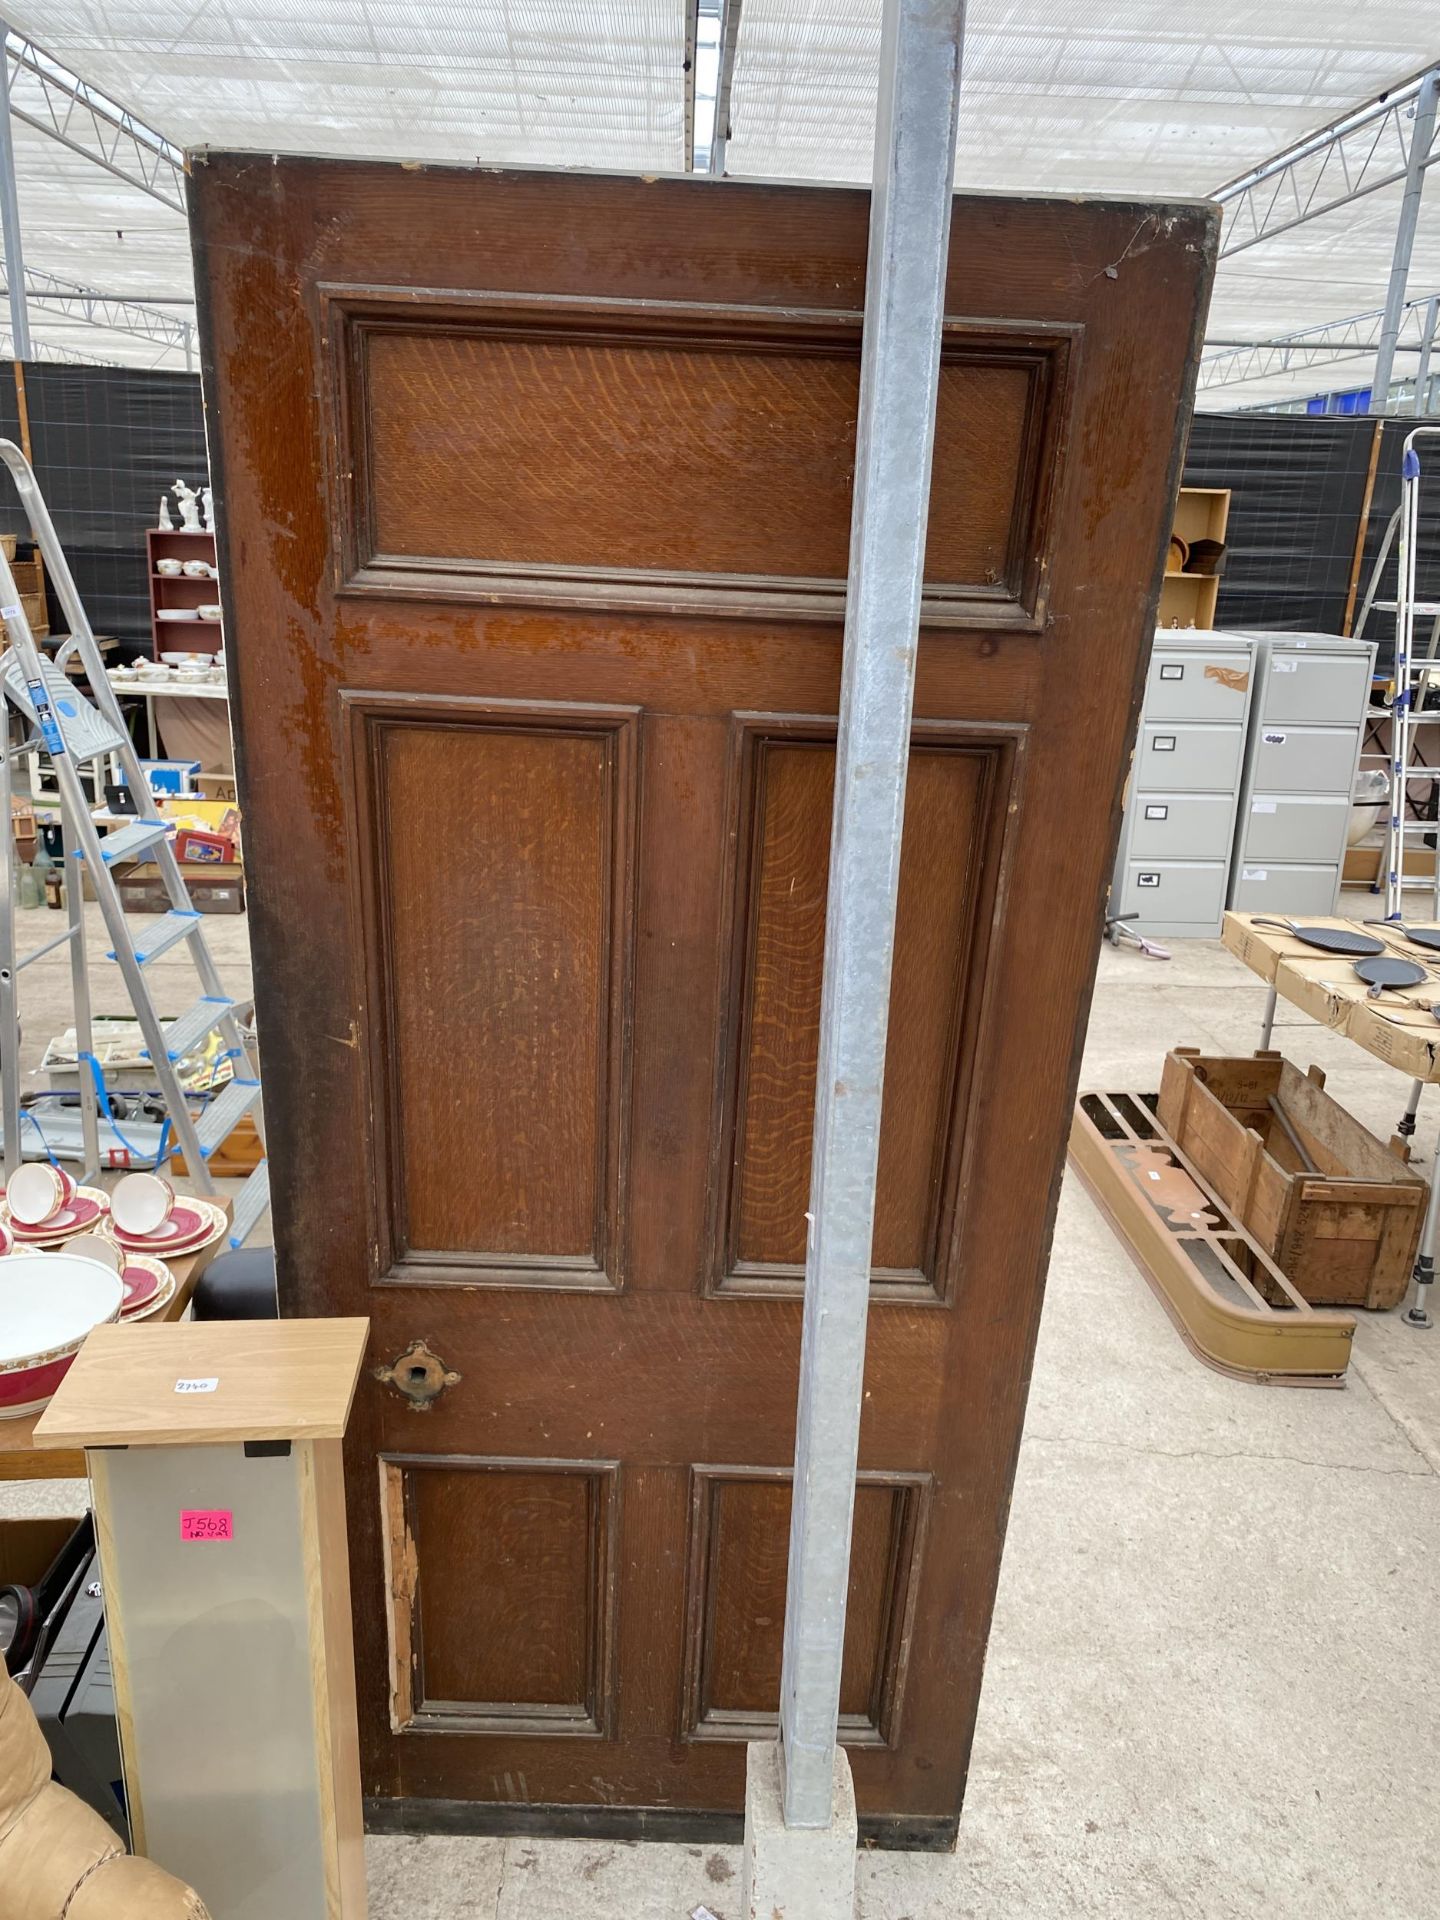 A VINTAGE SCRUMBLE PINE EXTERNAL DOOR WITH DECORATIVE PANELS - Image 4 of 4